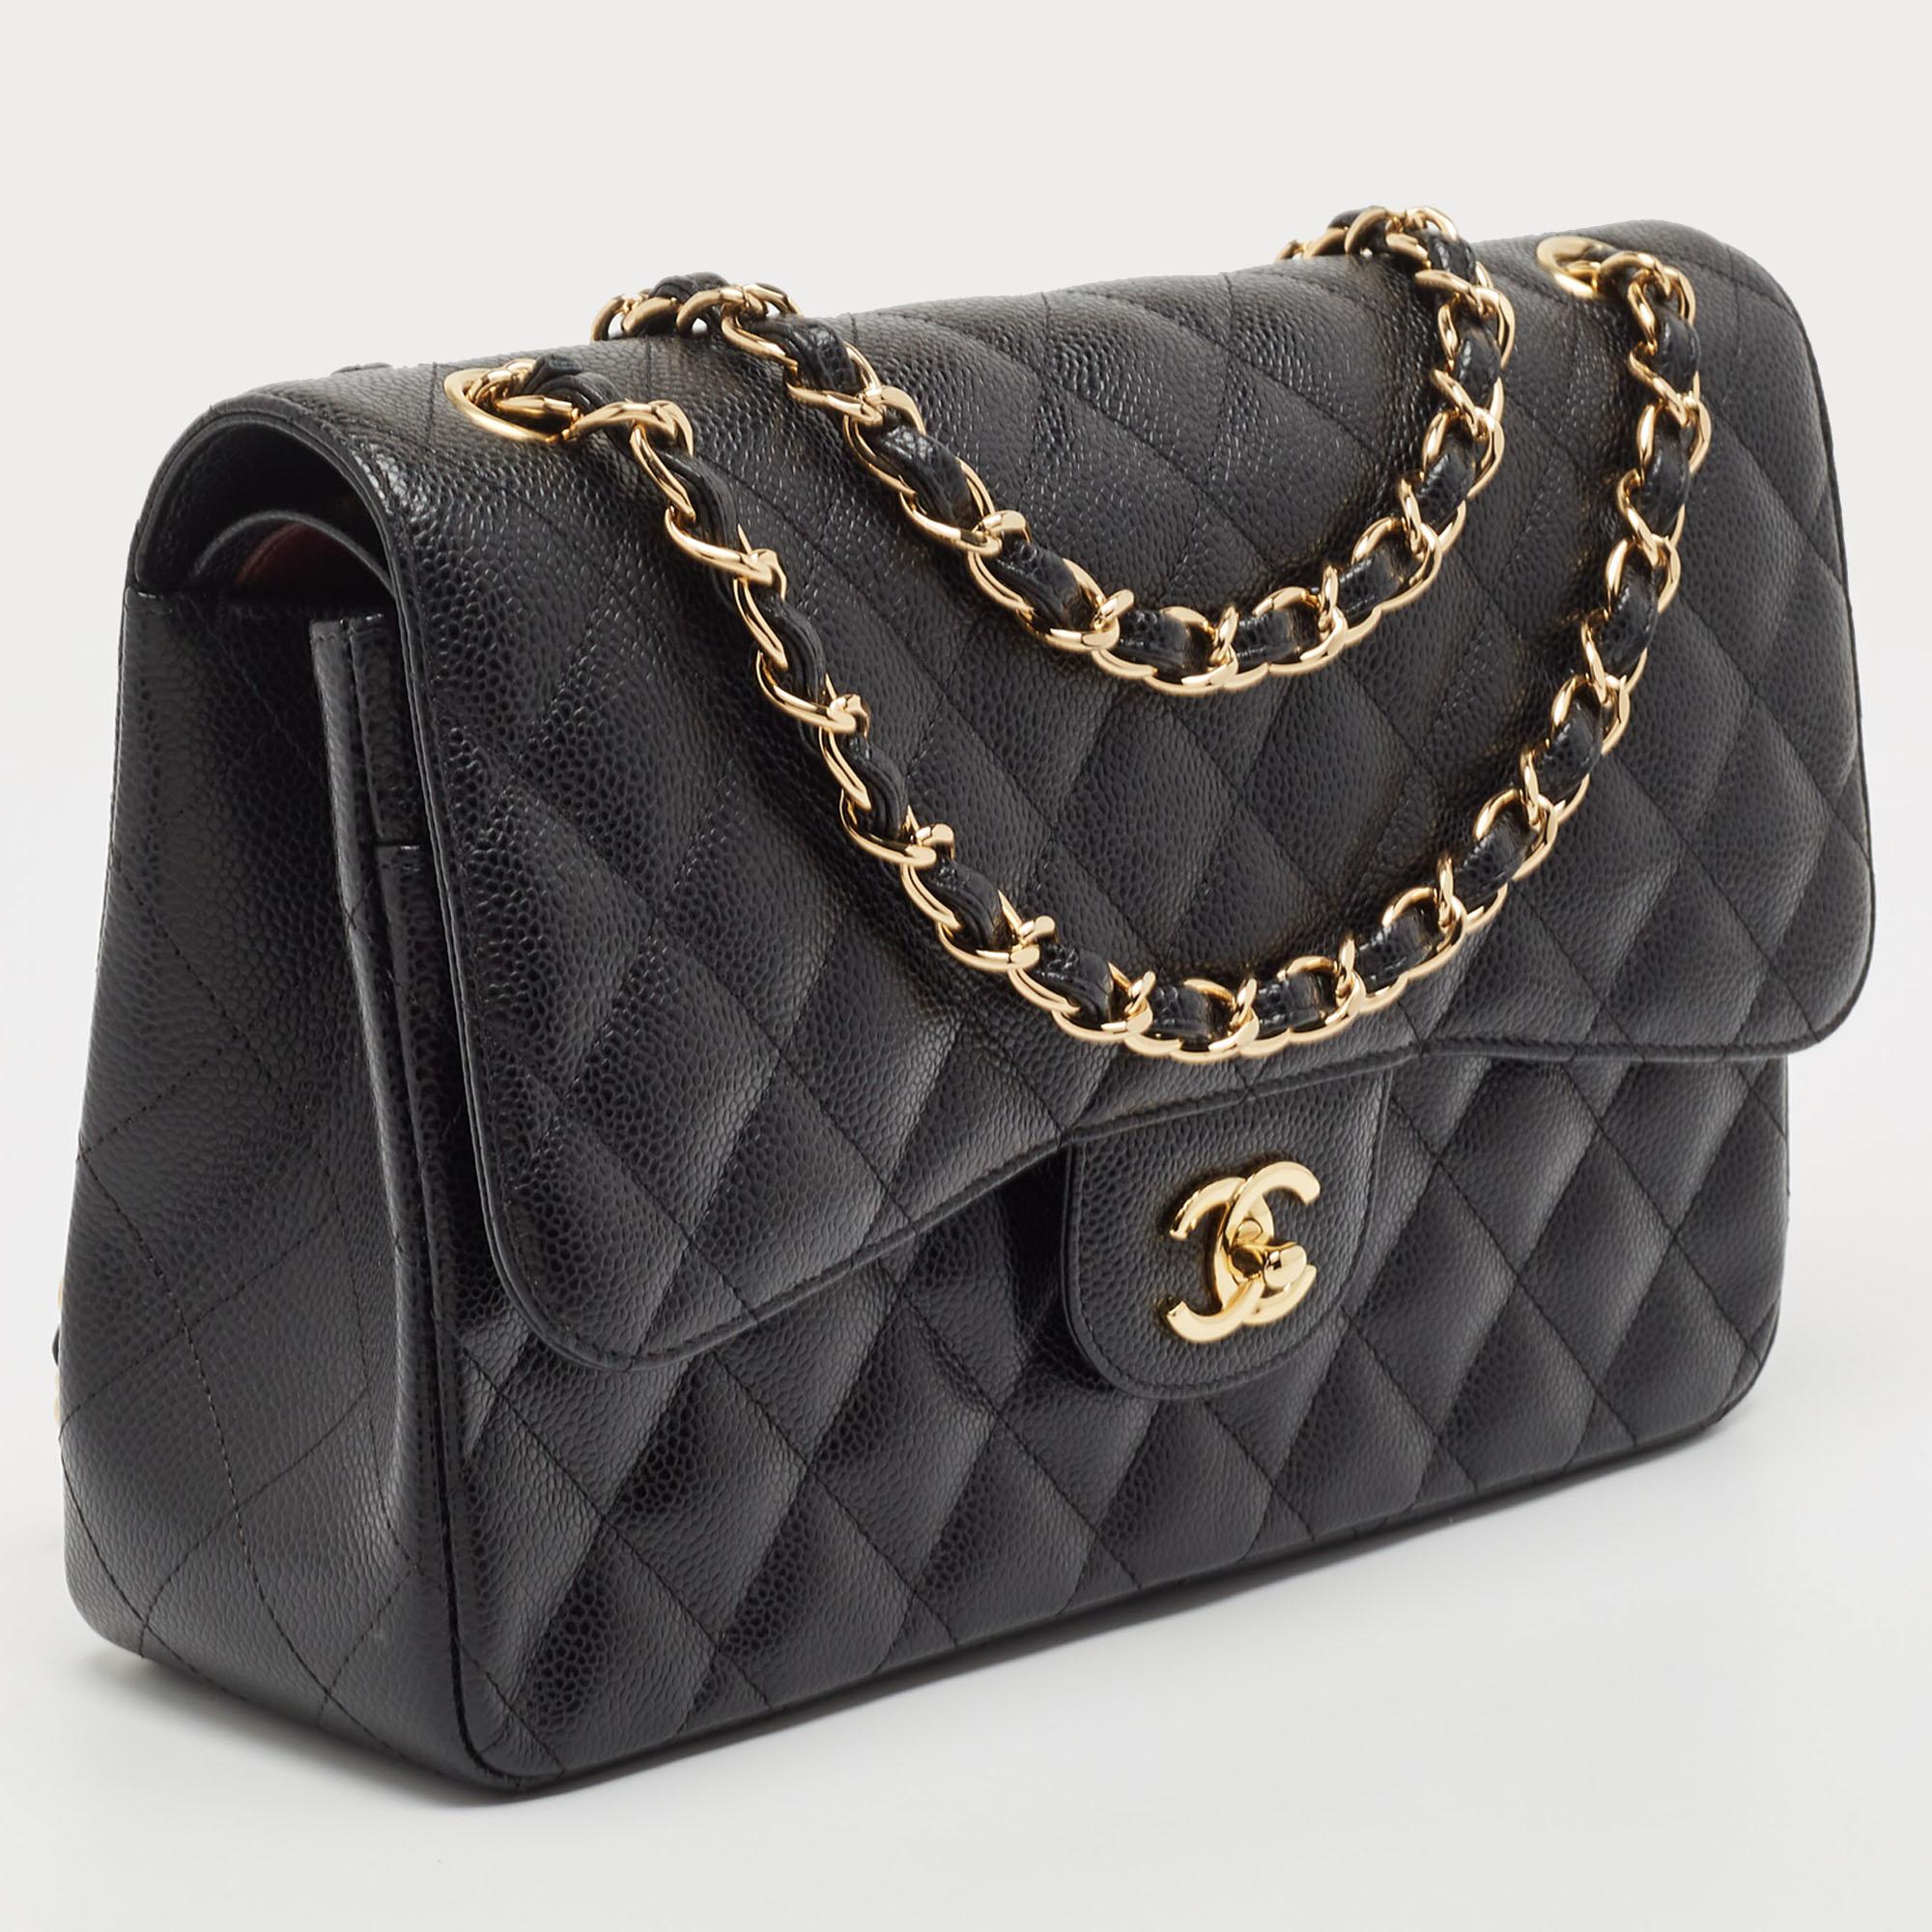 With flawless craftsmanship, immense style quotient, and an air of elegance, this Chanel bag has it all! Stitched to perfection, the handbag is made using only prime-quality materials so that it lasts you forever. With signature elements displayed